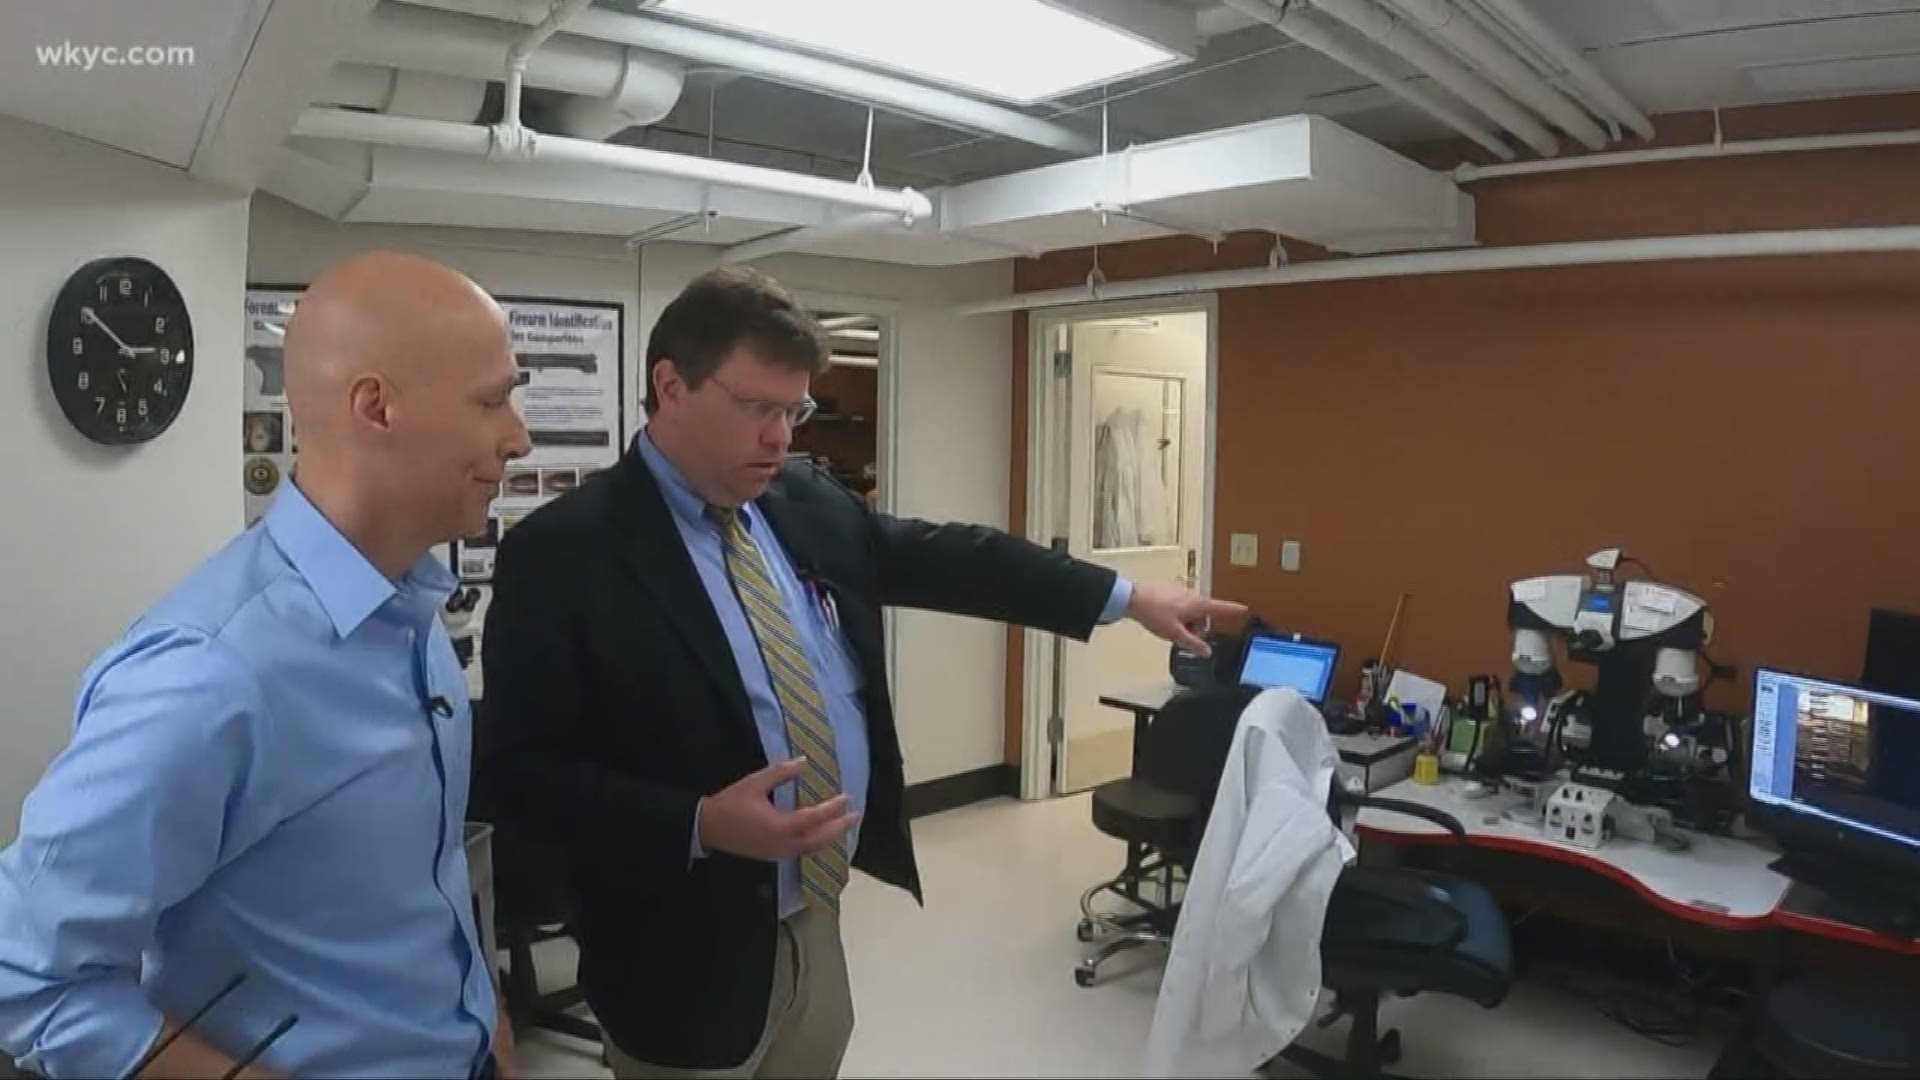 The Medical Examiner’s Office. Though associated with death, it often informs us about life. Mark Naymik takes an inside look at Cuyahoga County's autopsy room.